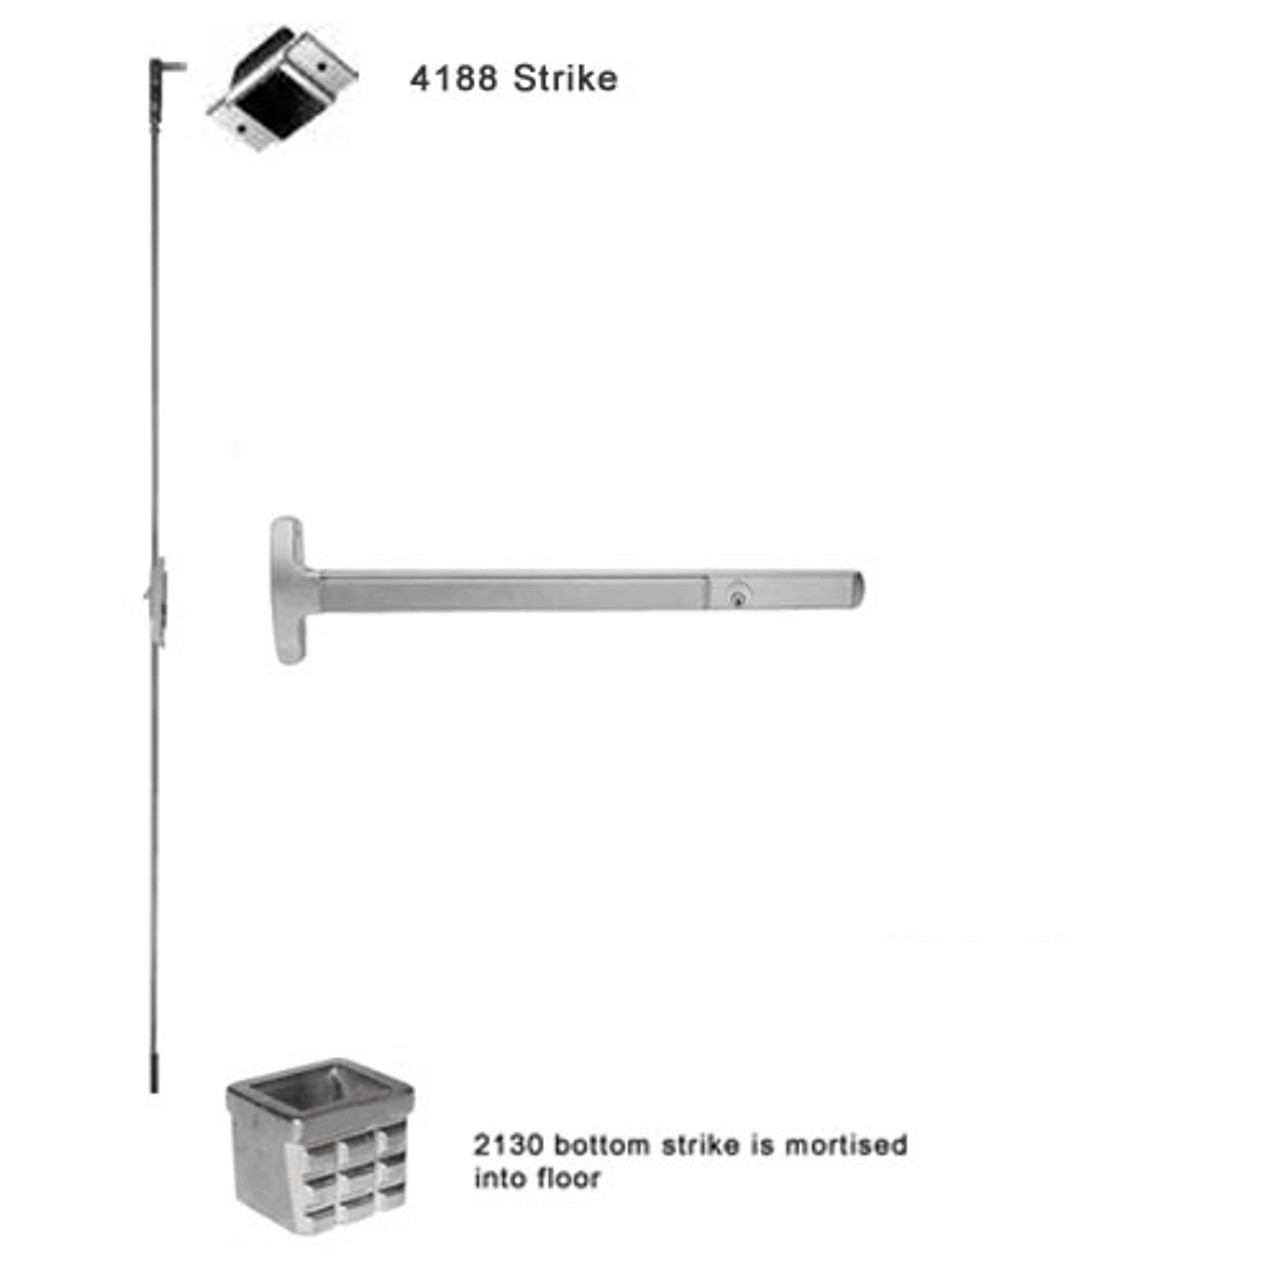 CD24-C-L-BE-DANE-US19-3-RHR Falcon 24 Series Concealed Vertical Rod Device 712L-BE Dane Lever Trim with Blank Escutcheon in Flat Black Painted